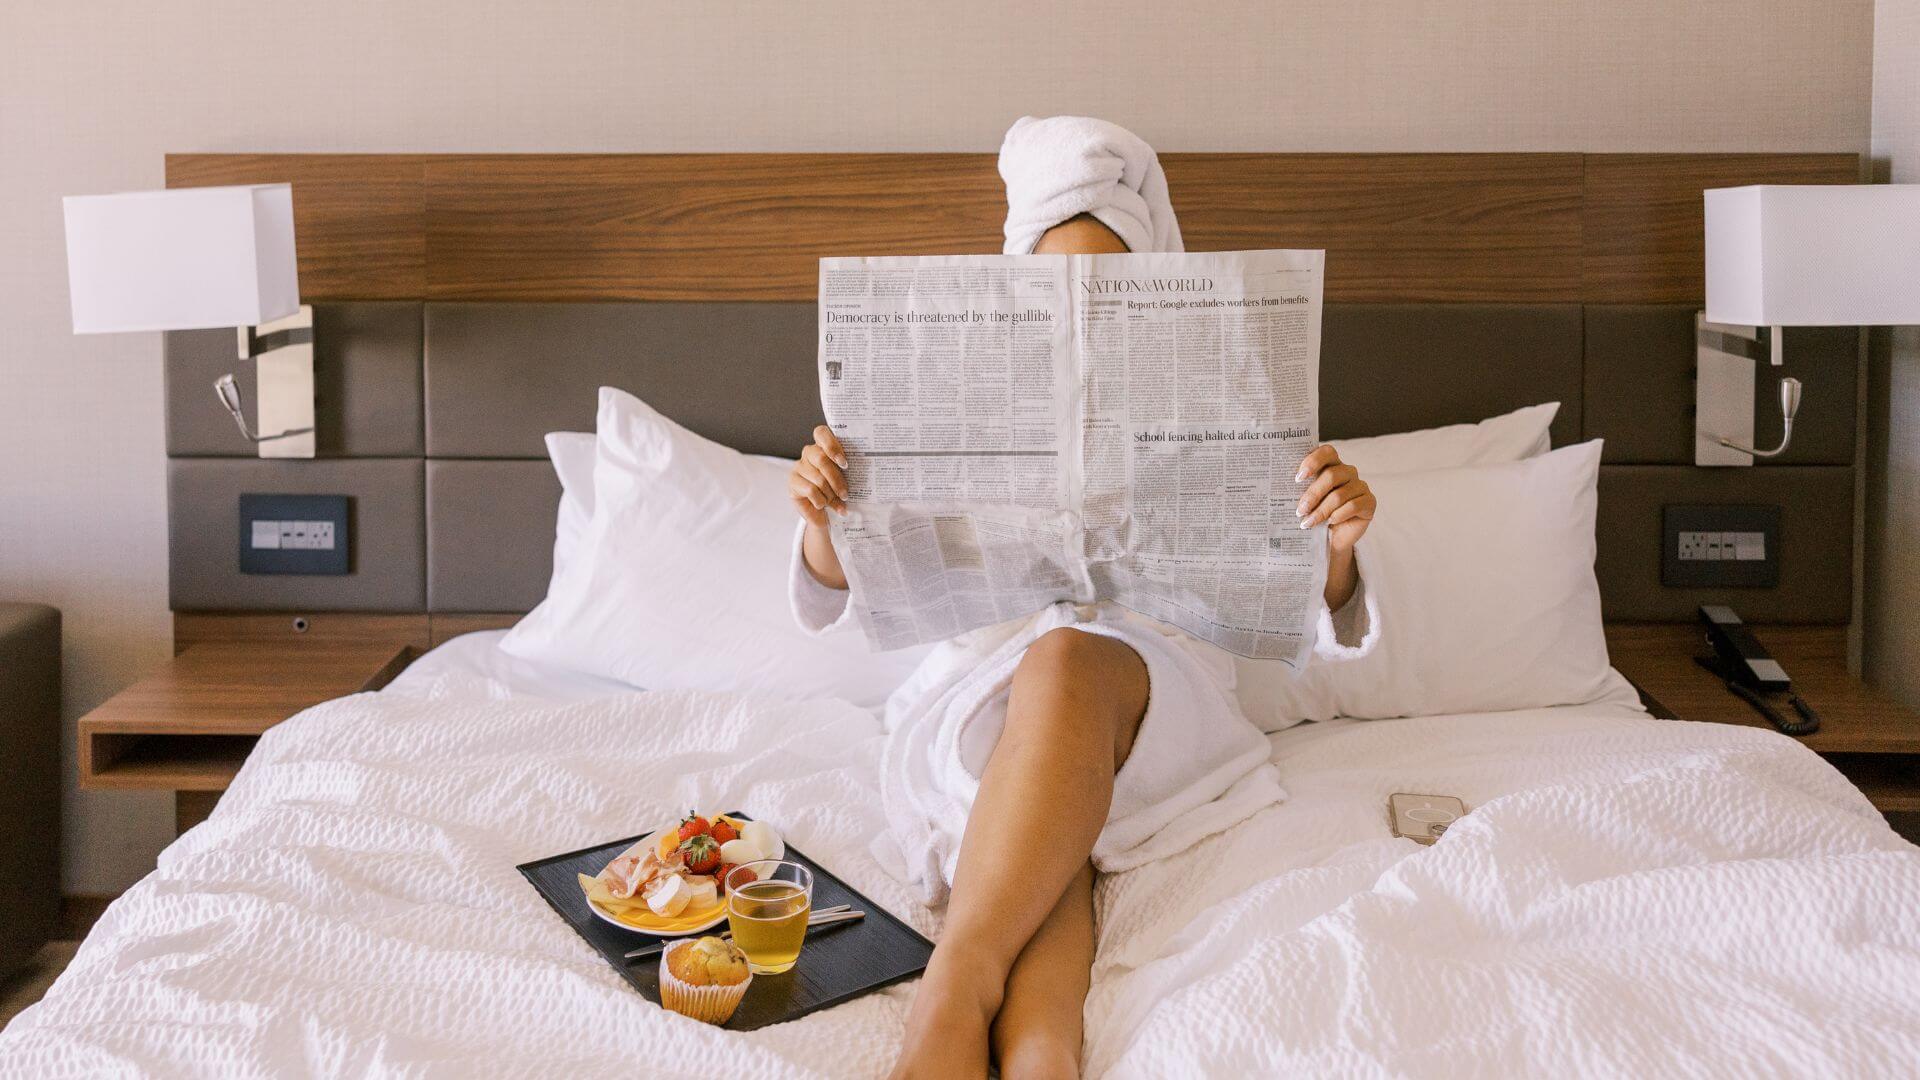 A woman in a hotel treating herself to a breakfast in bed